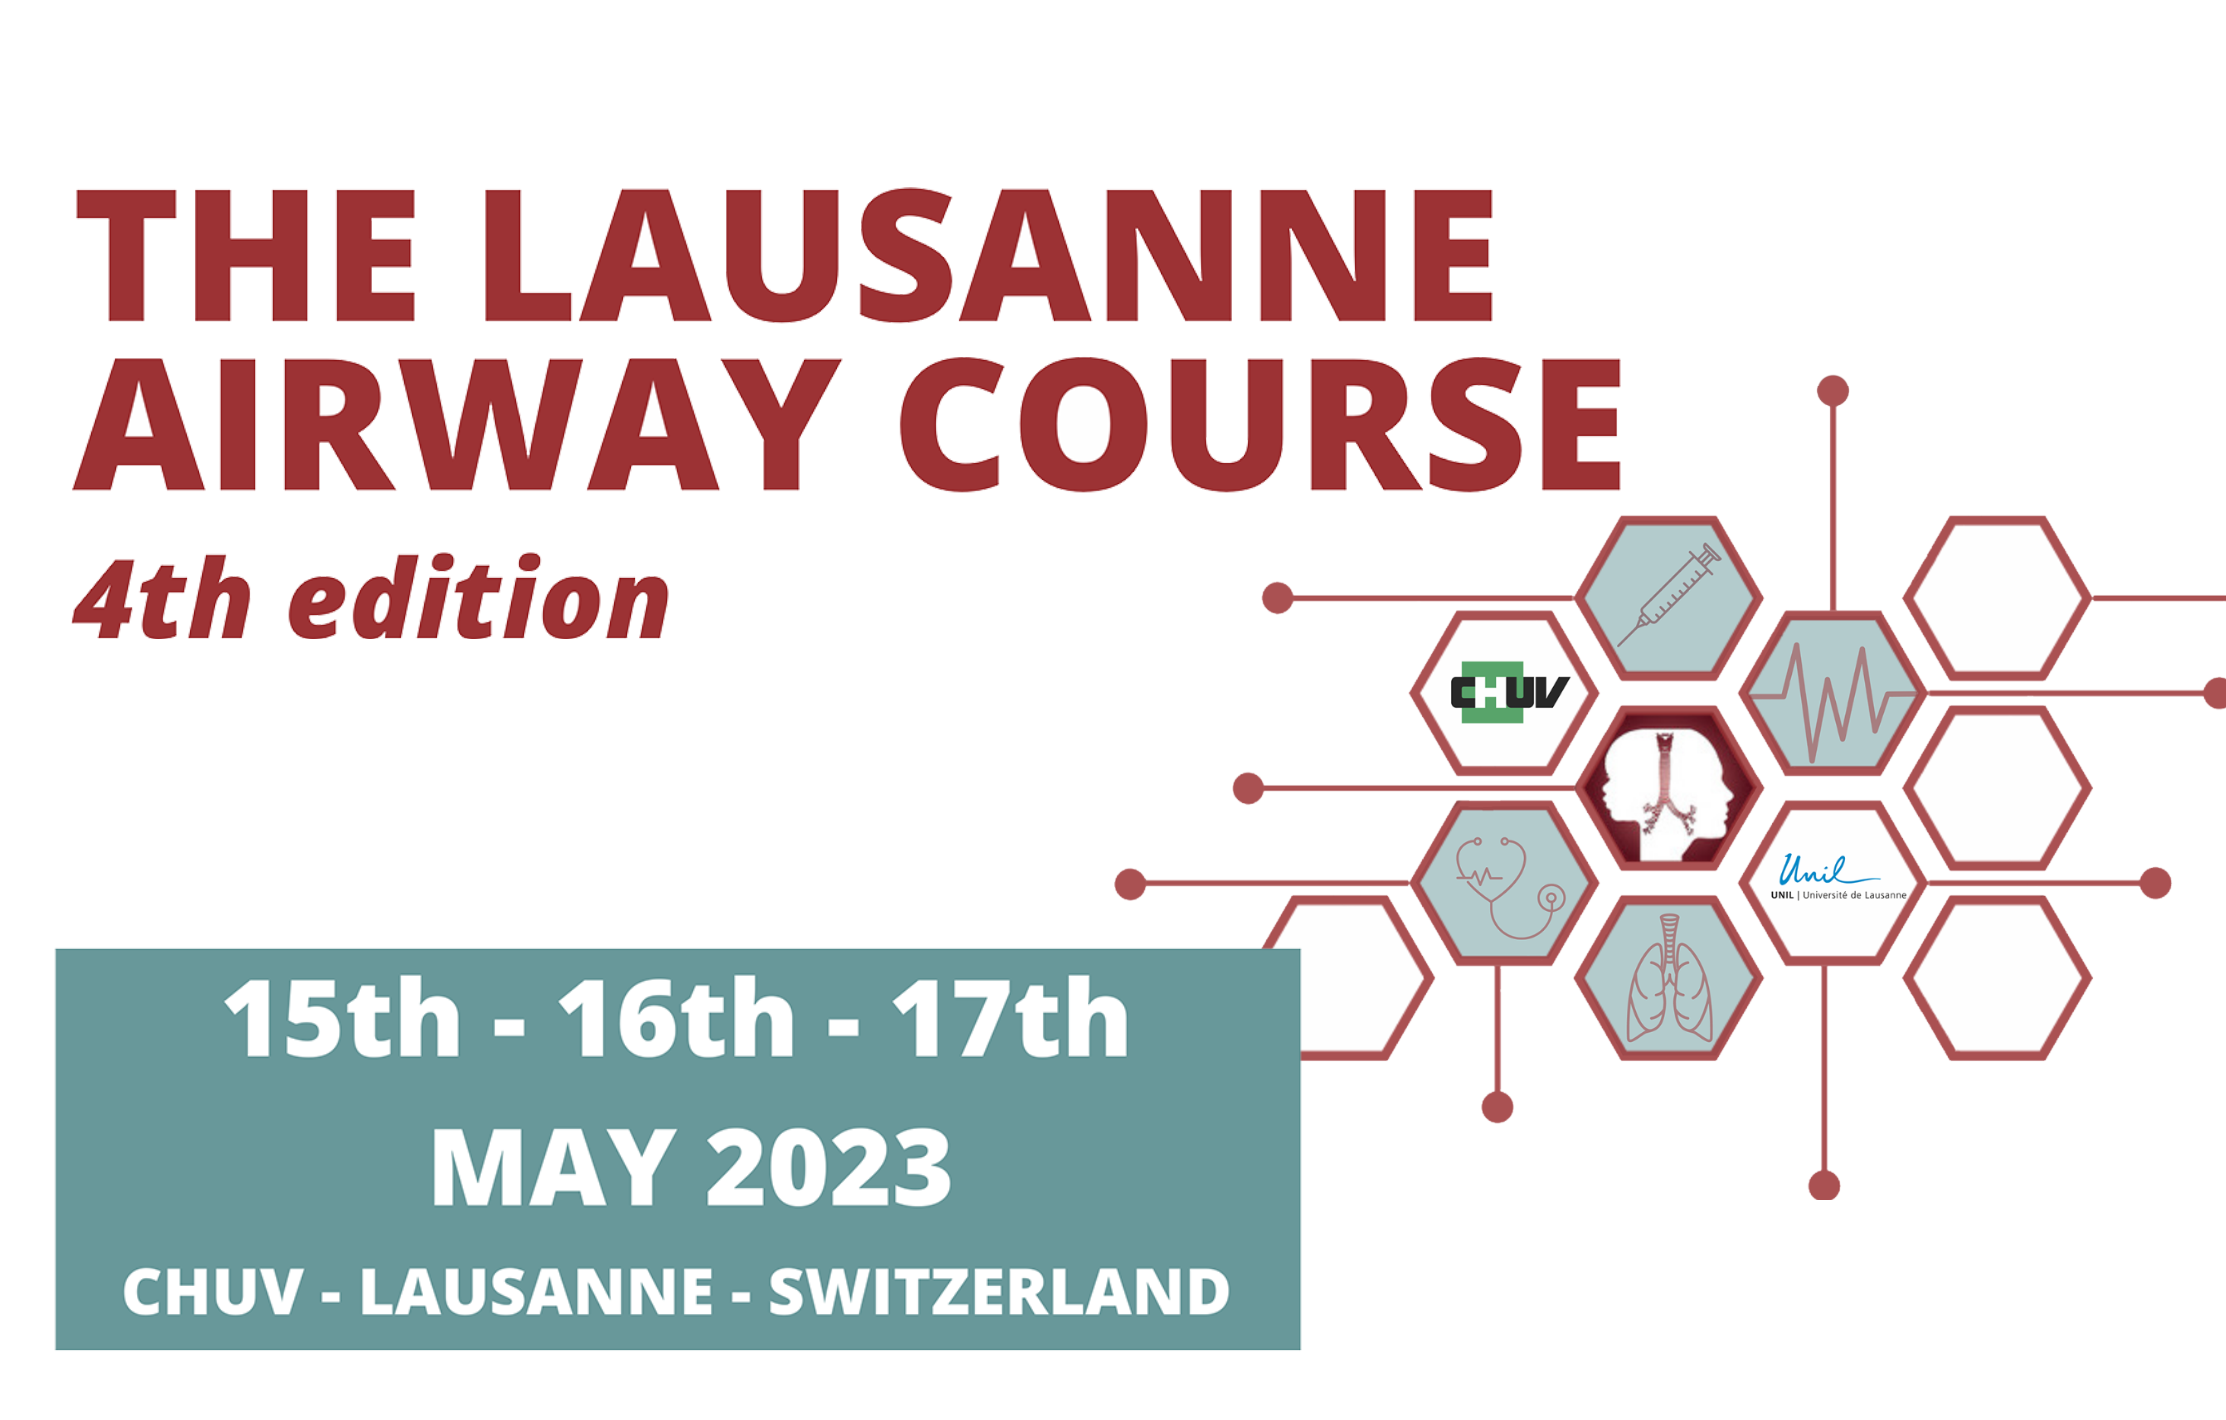 LAUSANNE AIRWAY COURSE 2023